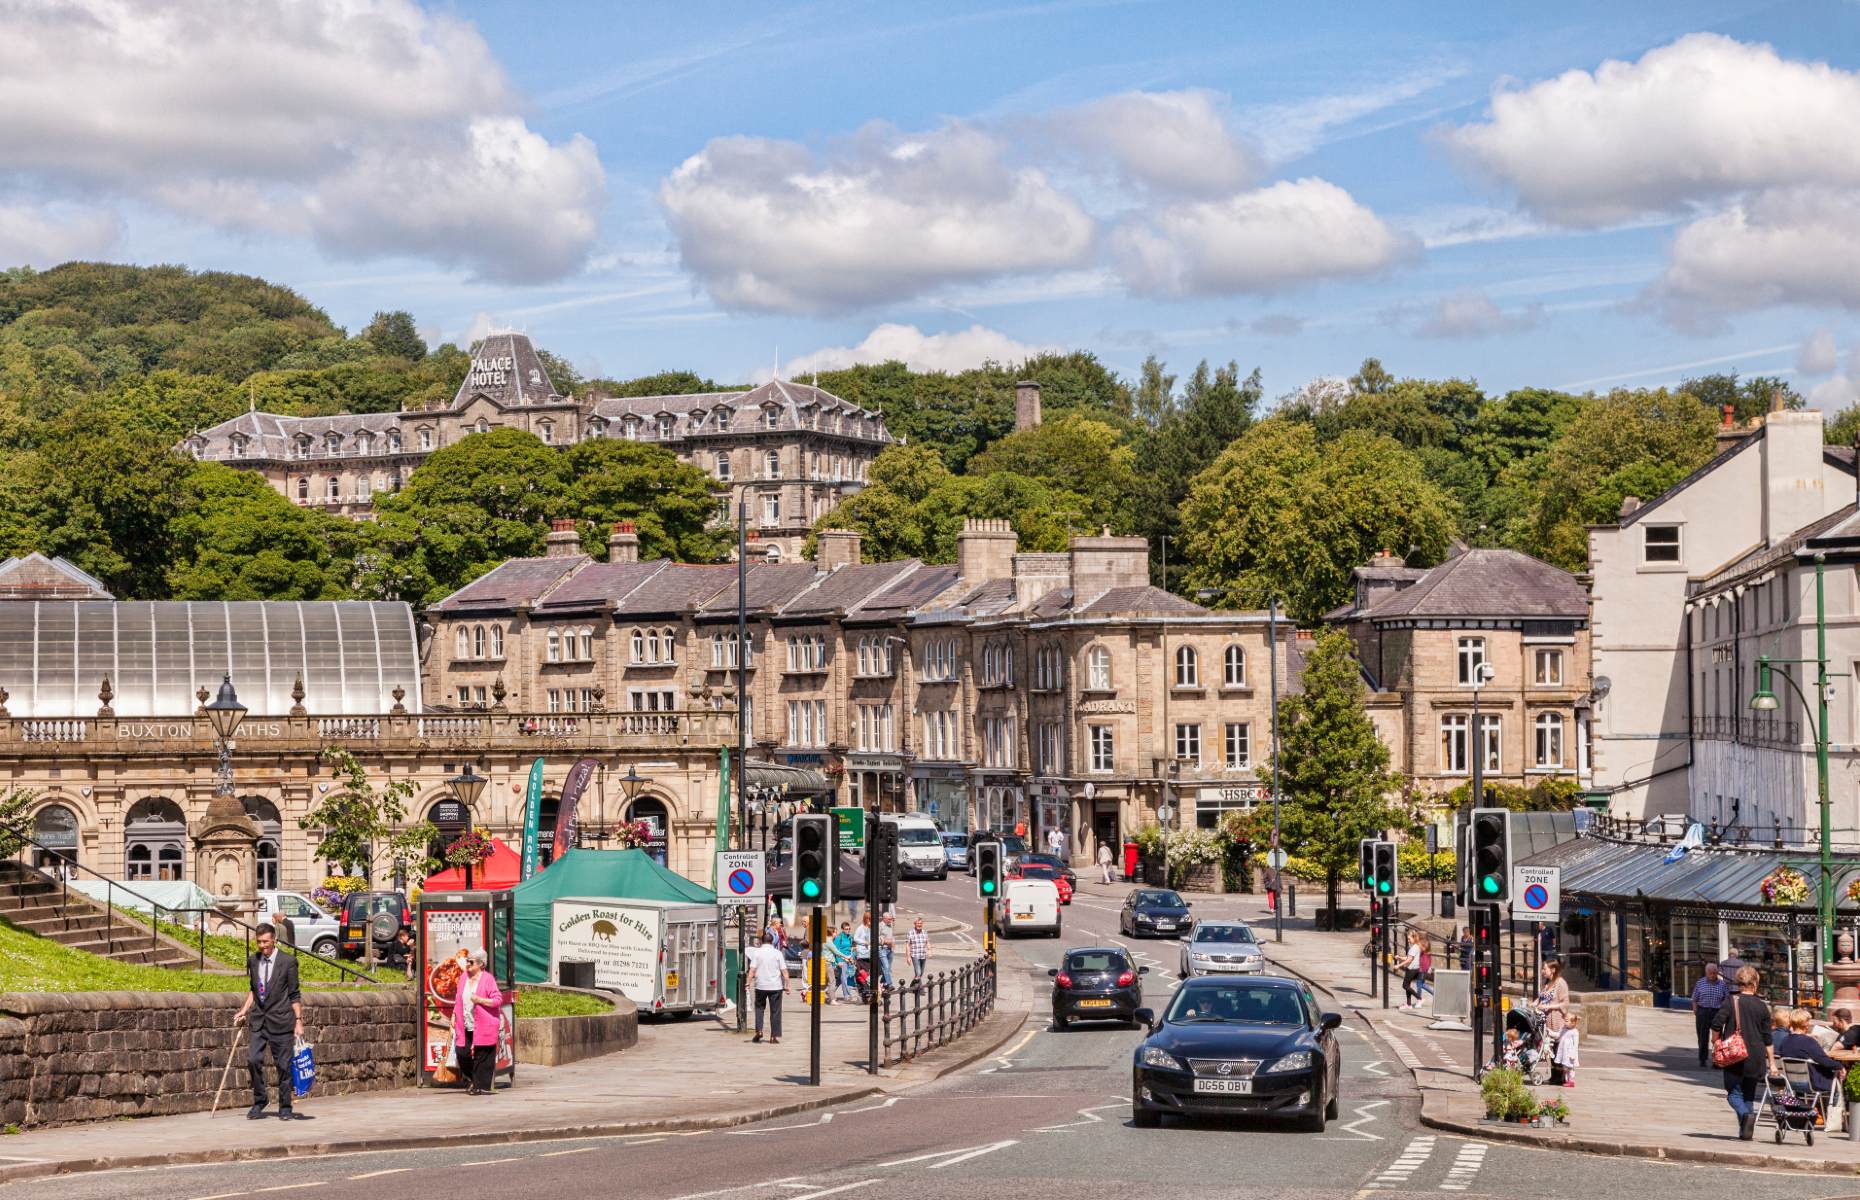 The Peak District town of Buxton (image: travellight/Shutterstock)